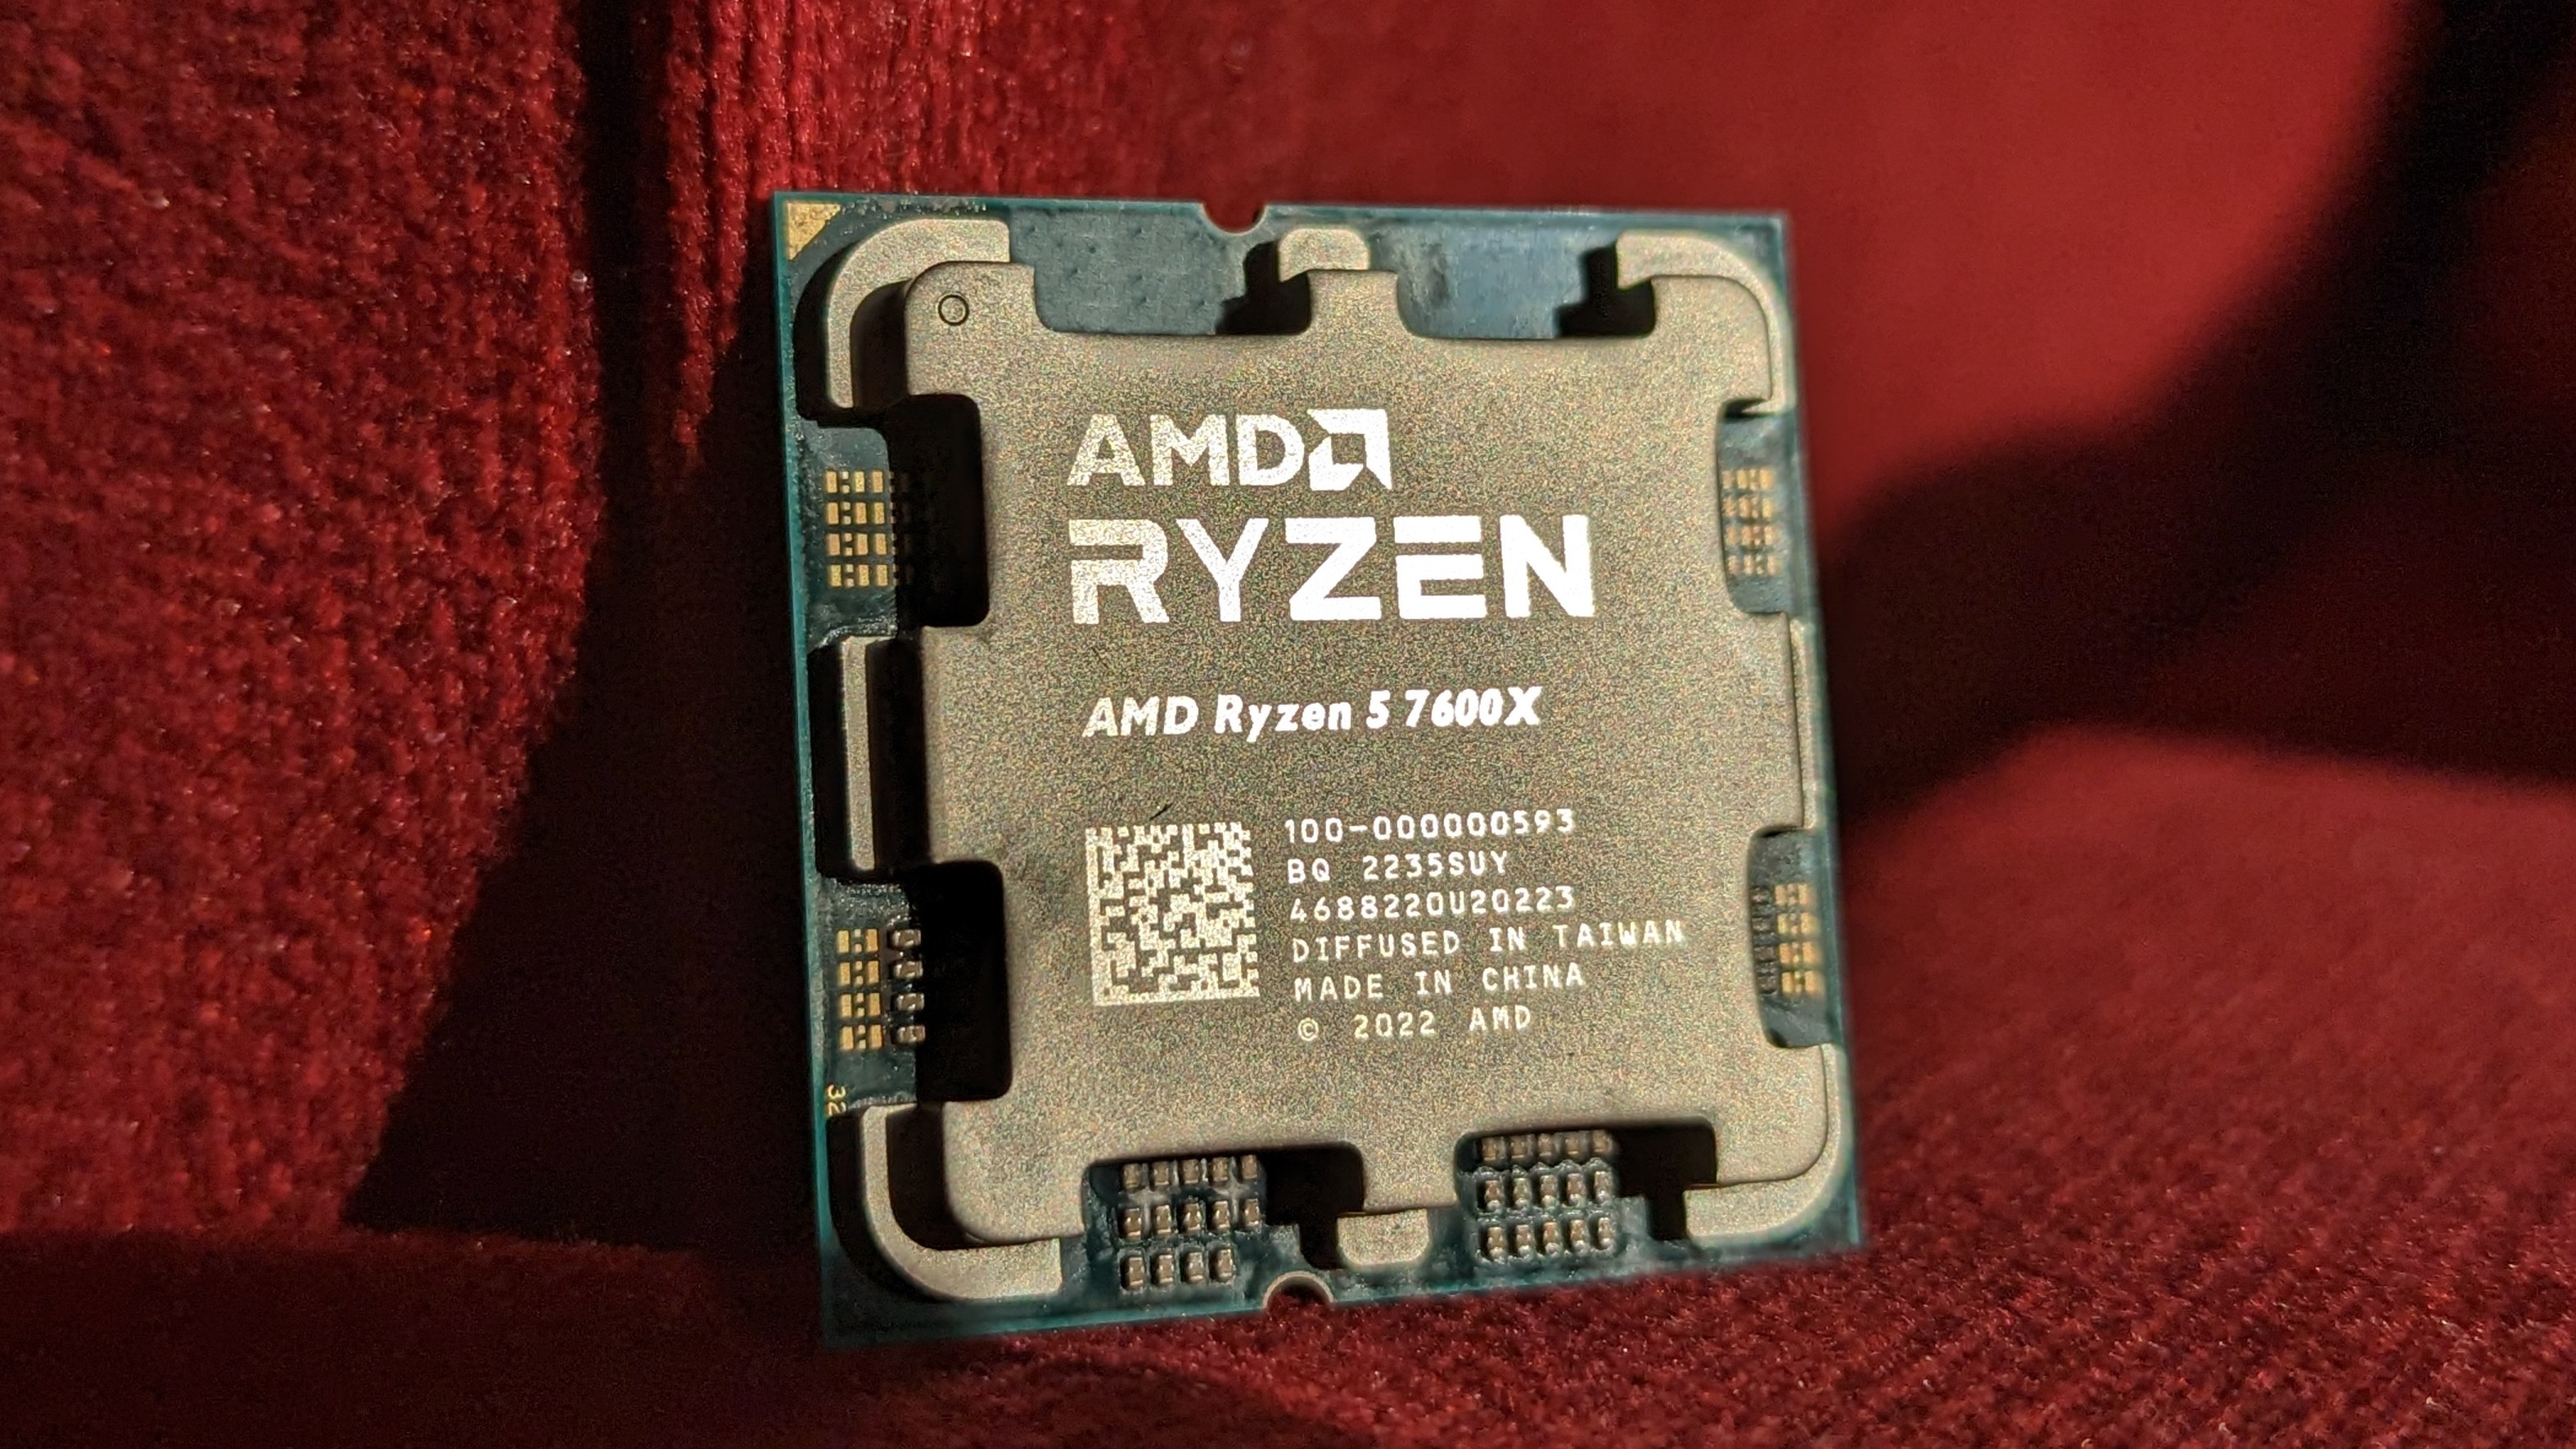 AMD Ryzen 7600X leaning against red material